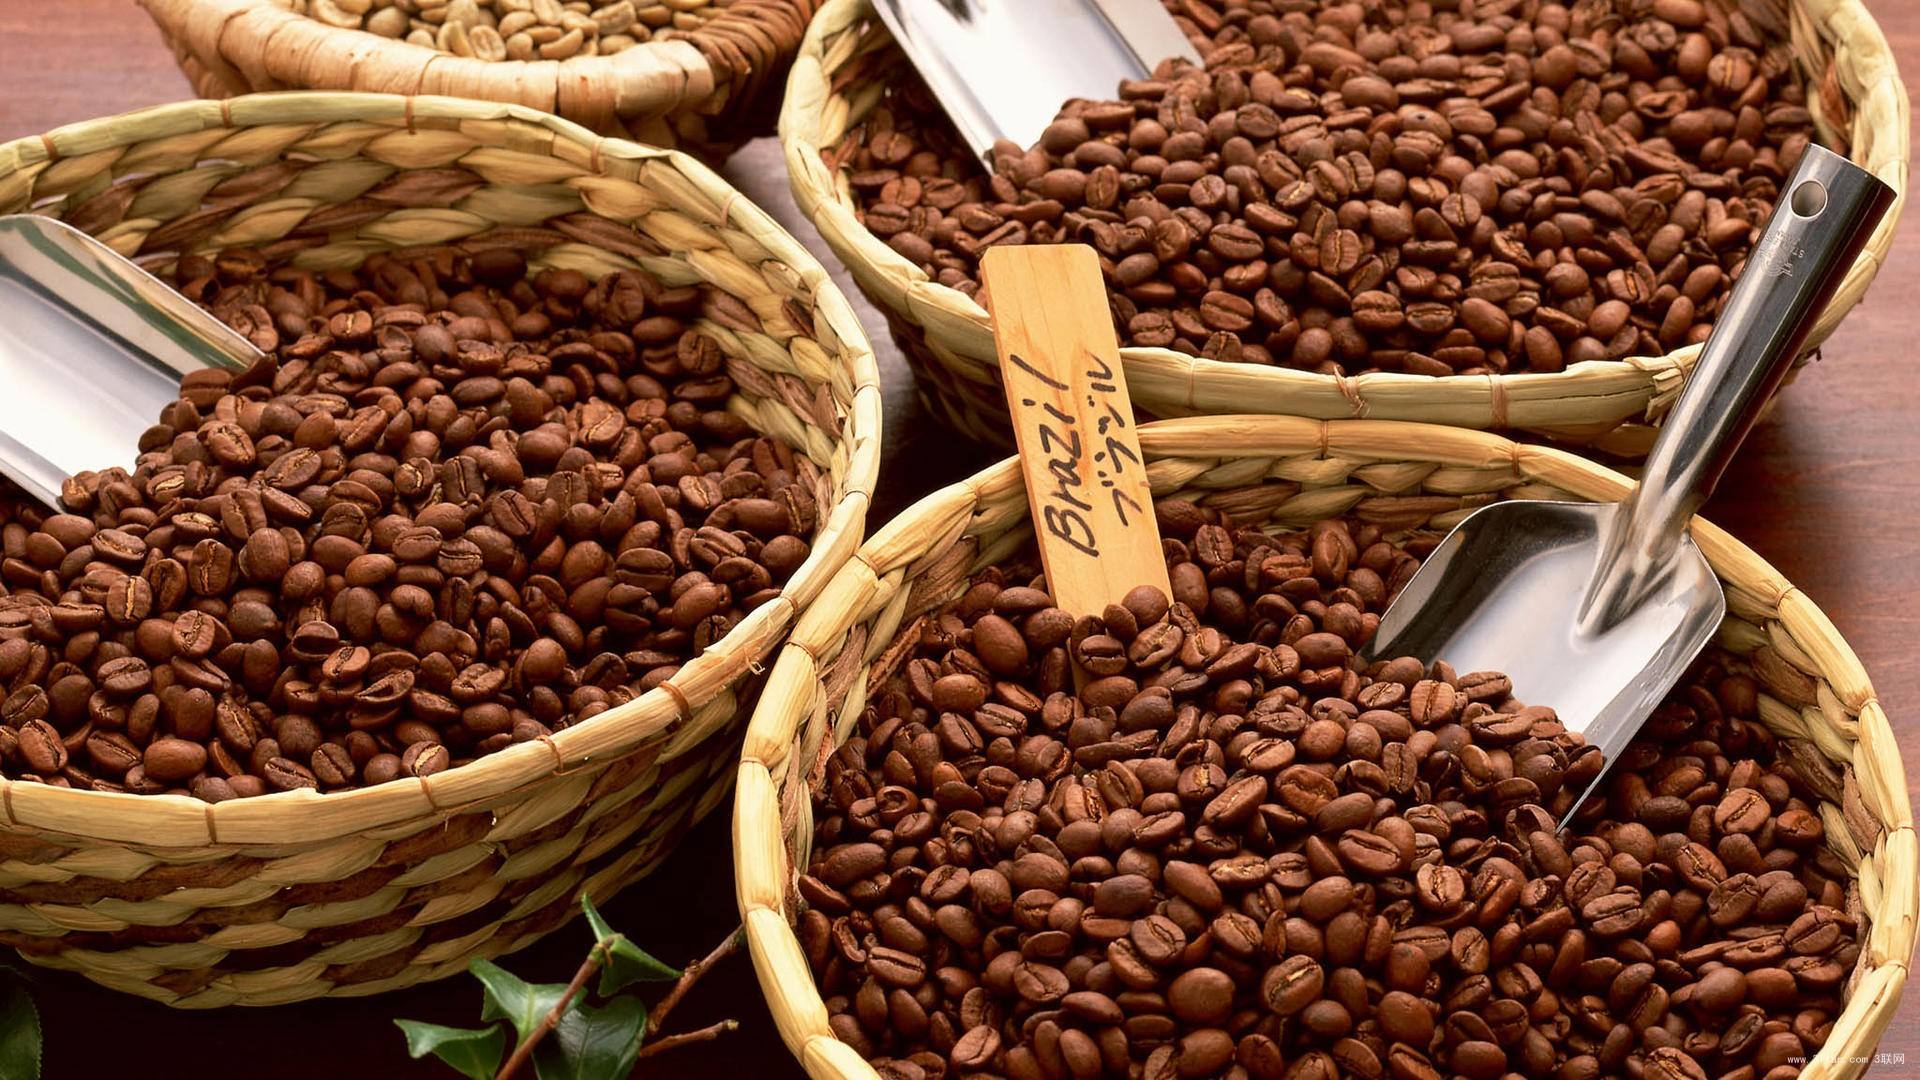 How about Salvadoran coffee beans? Salvador coffee beans?